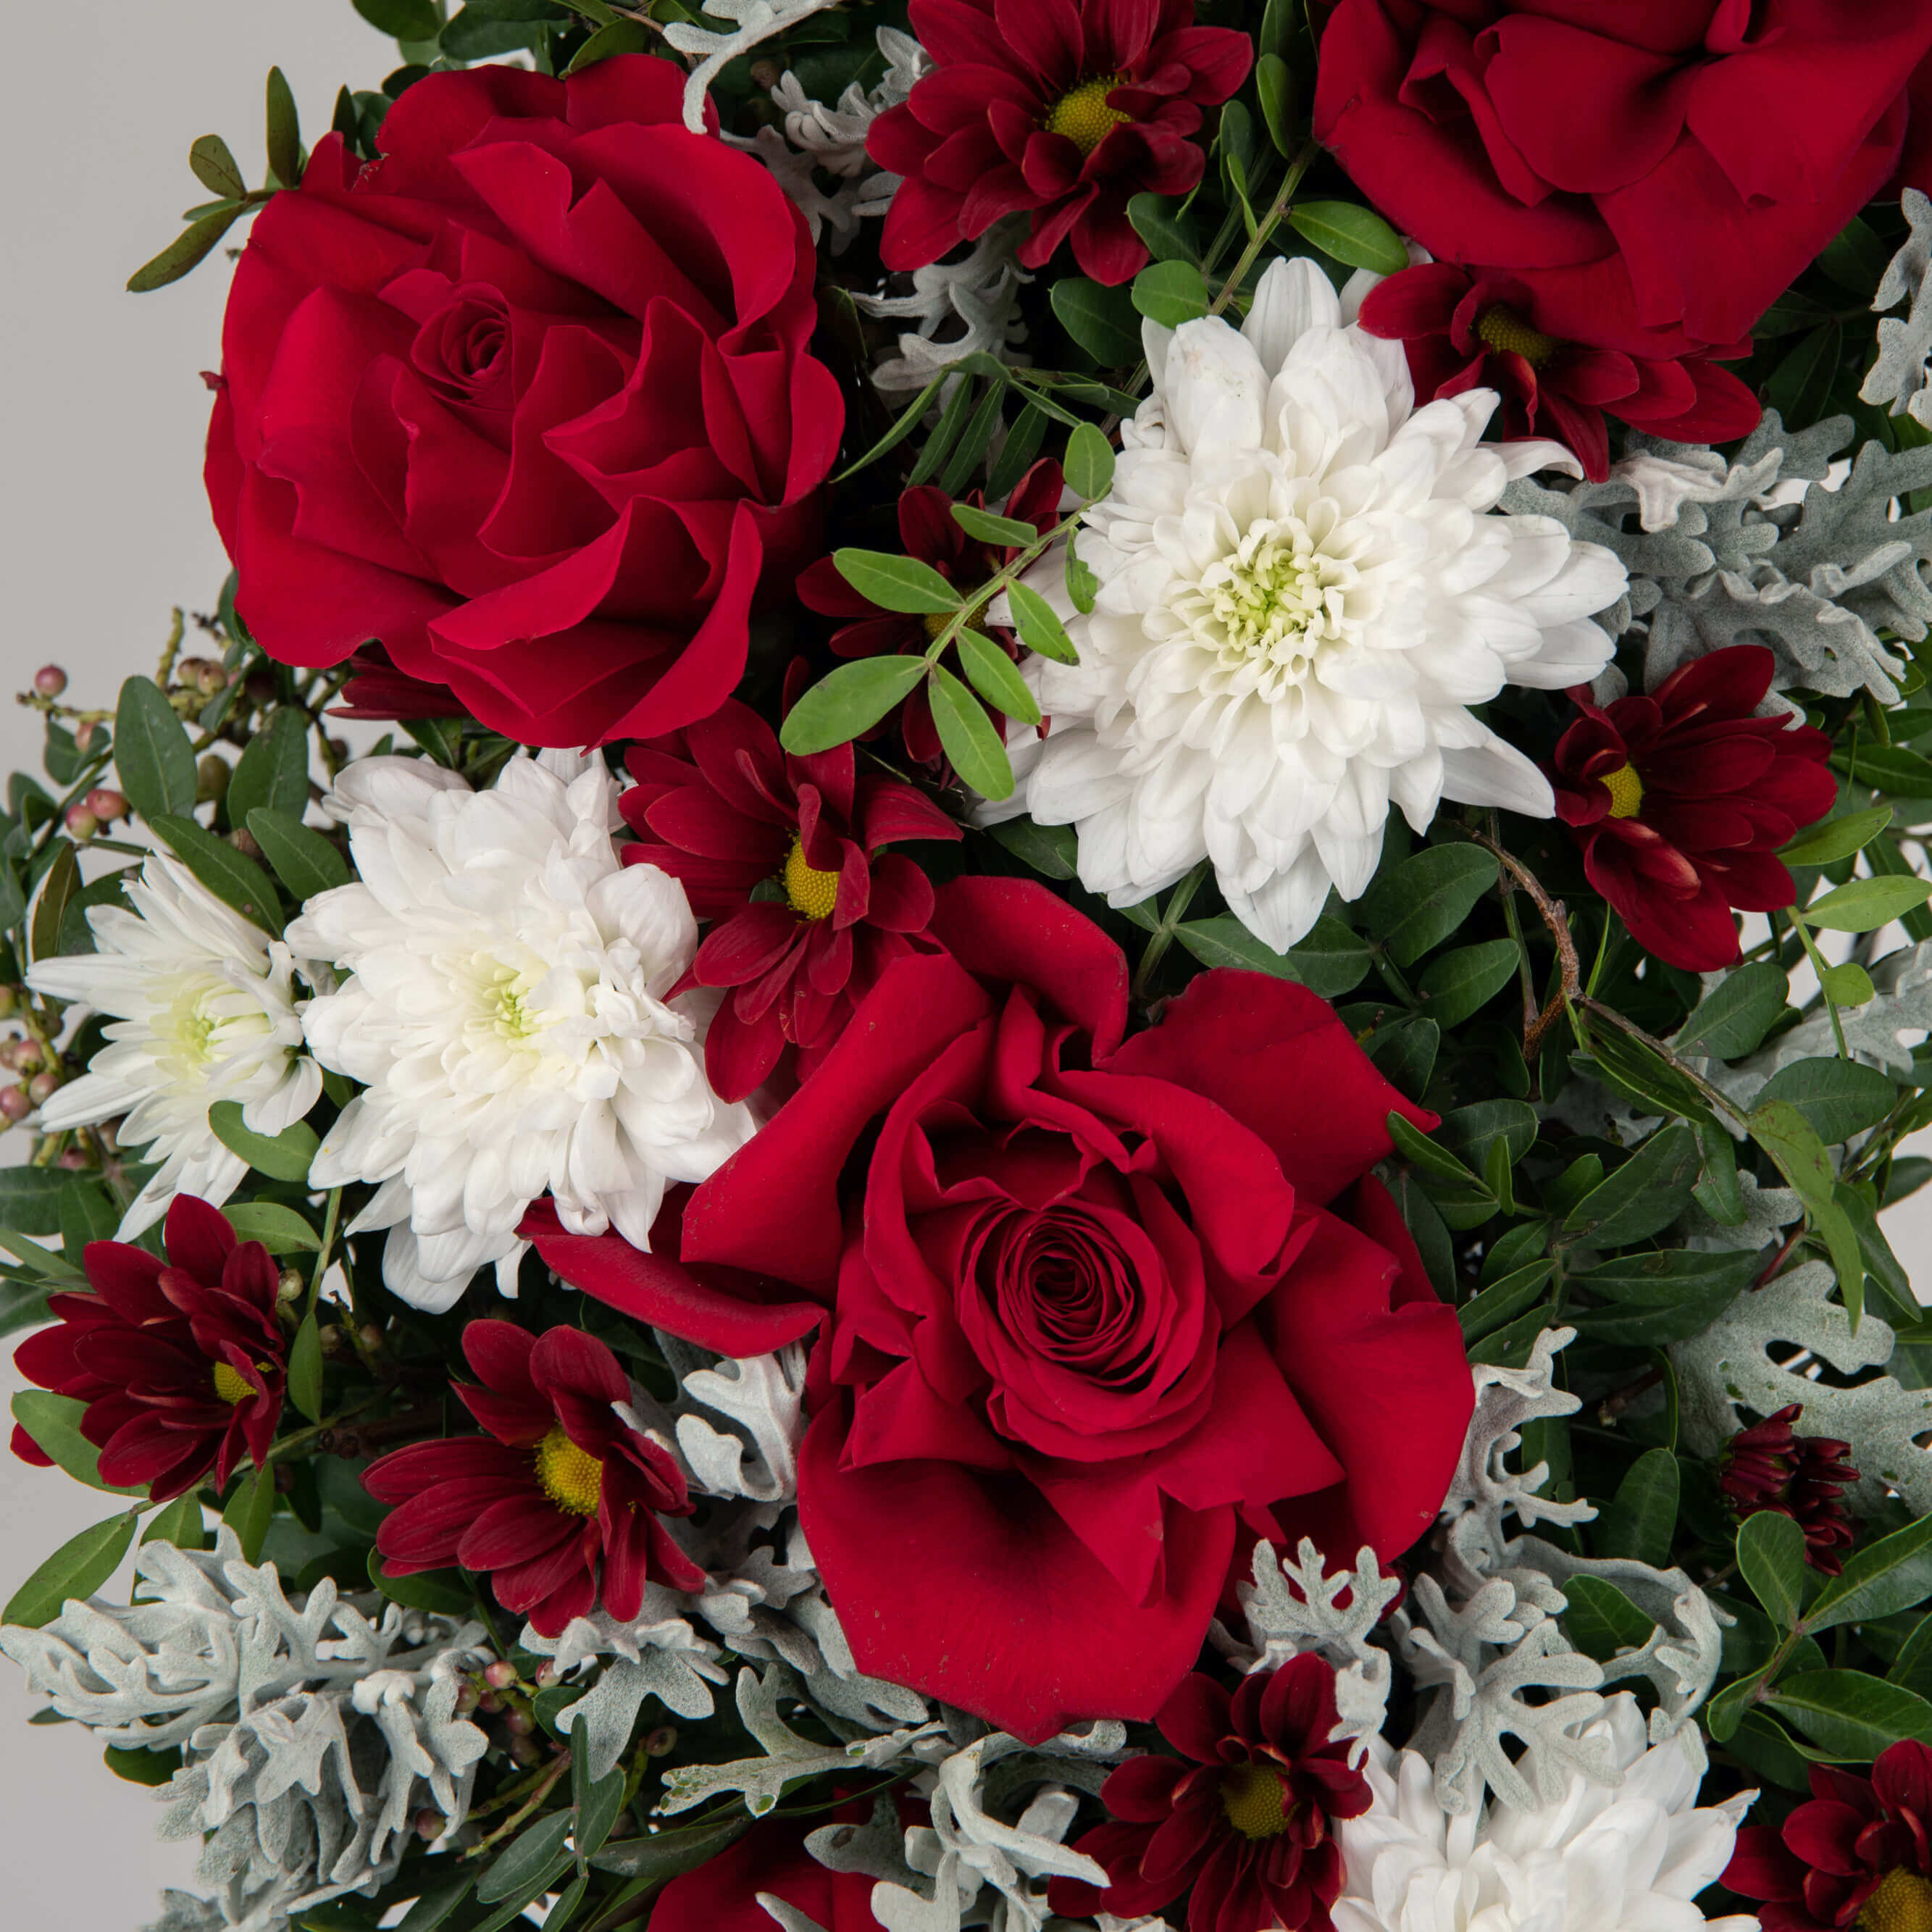 Crown with red roses and chrysanthemums